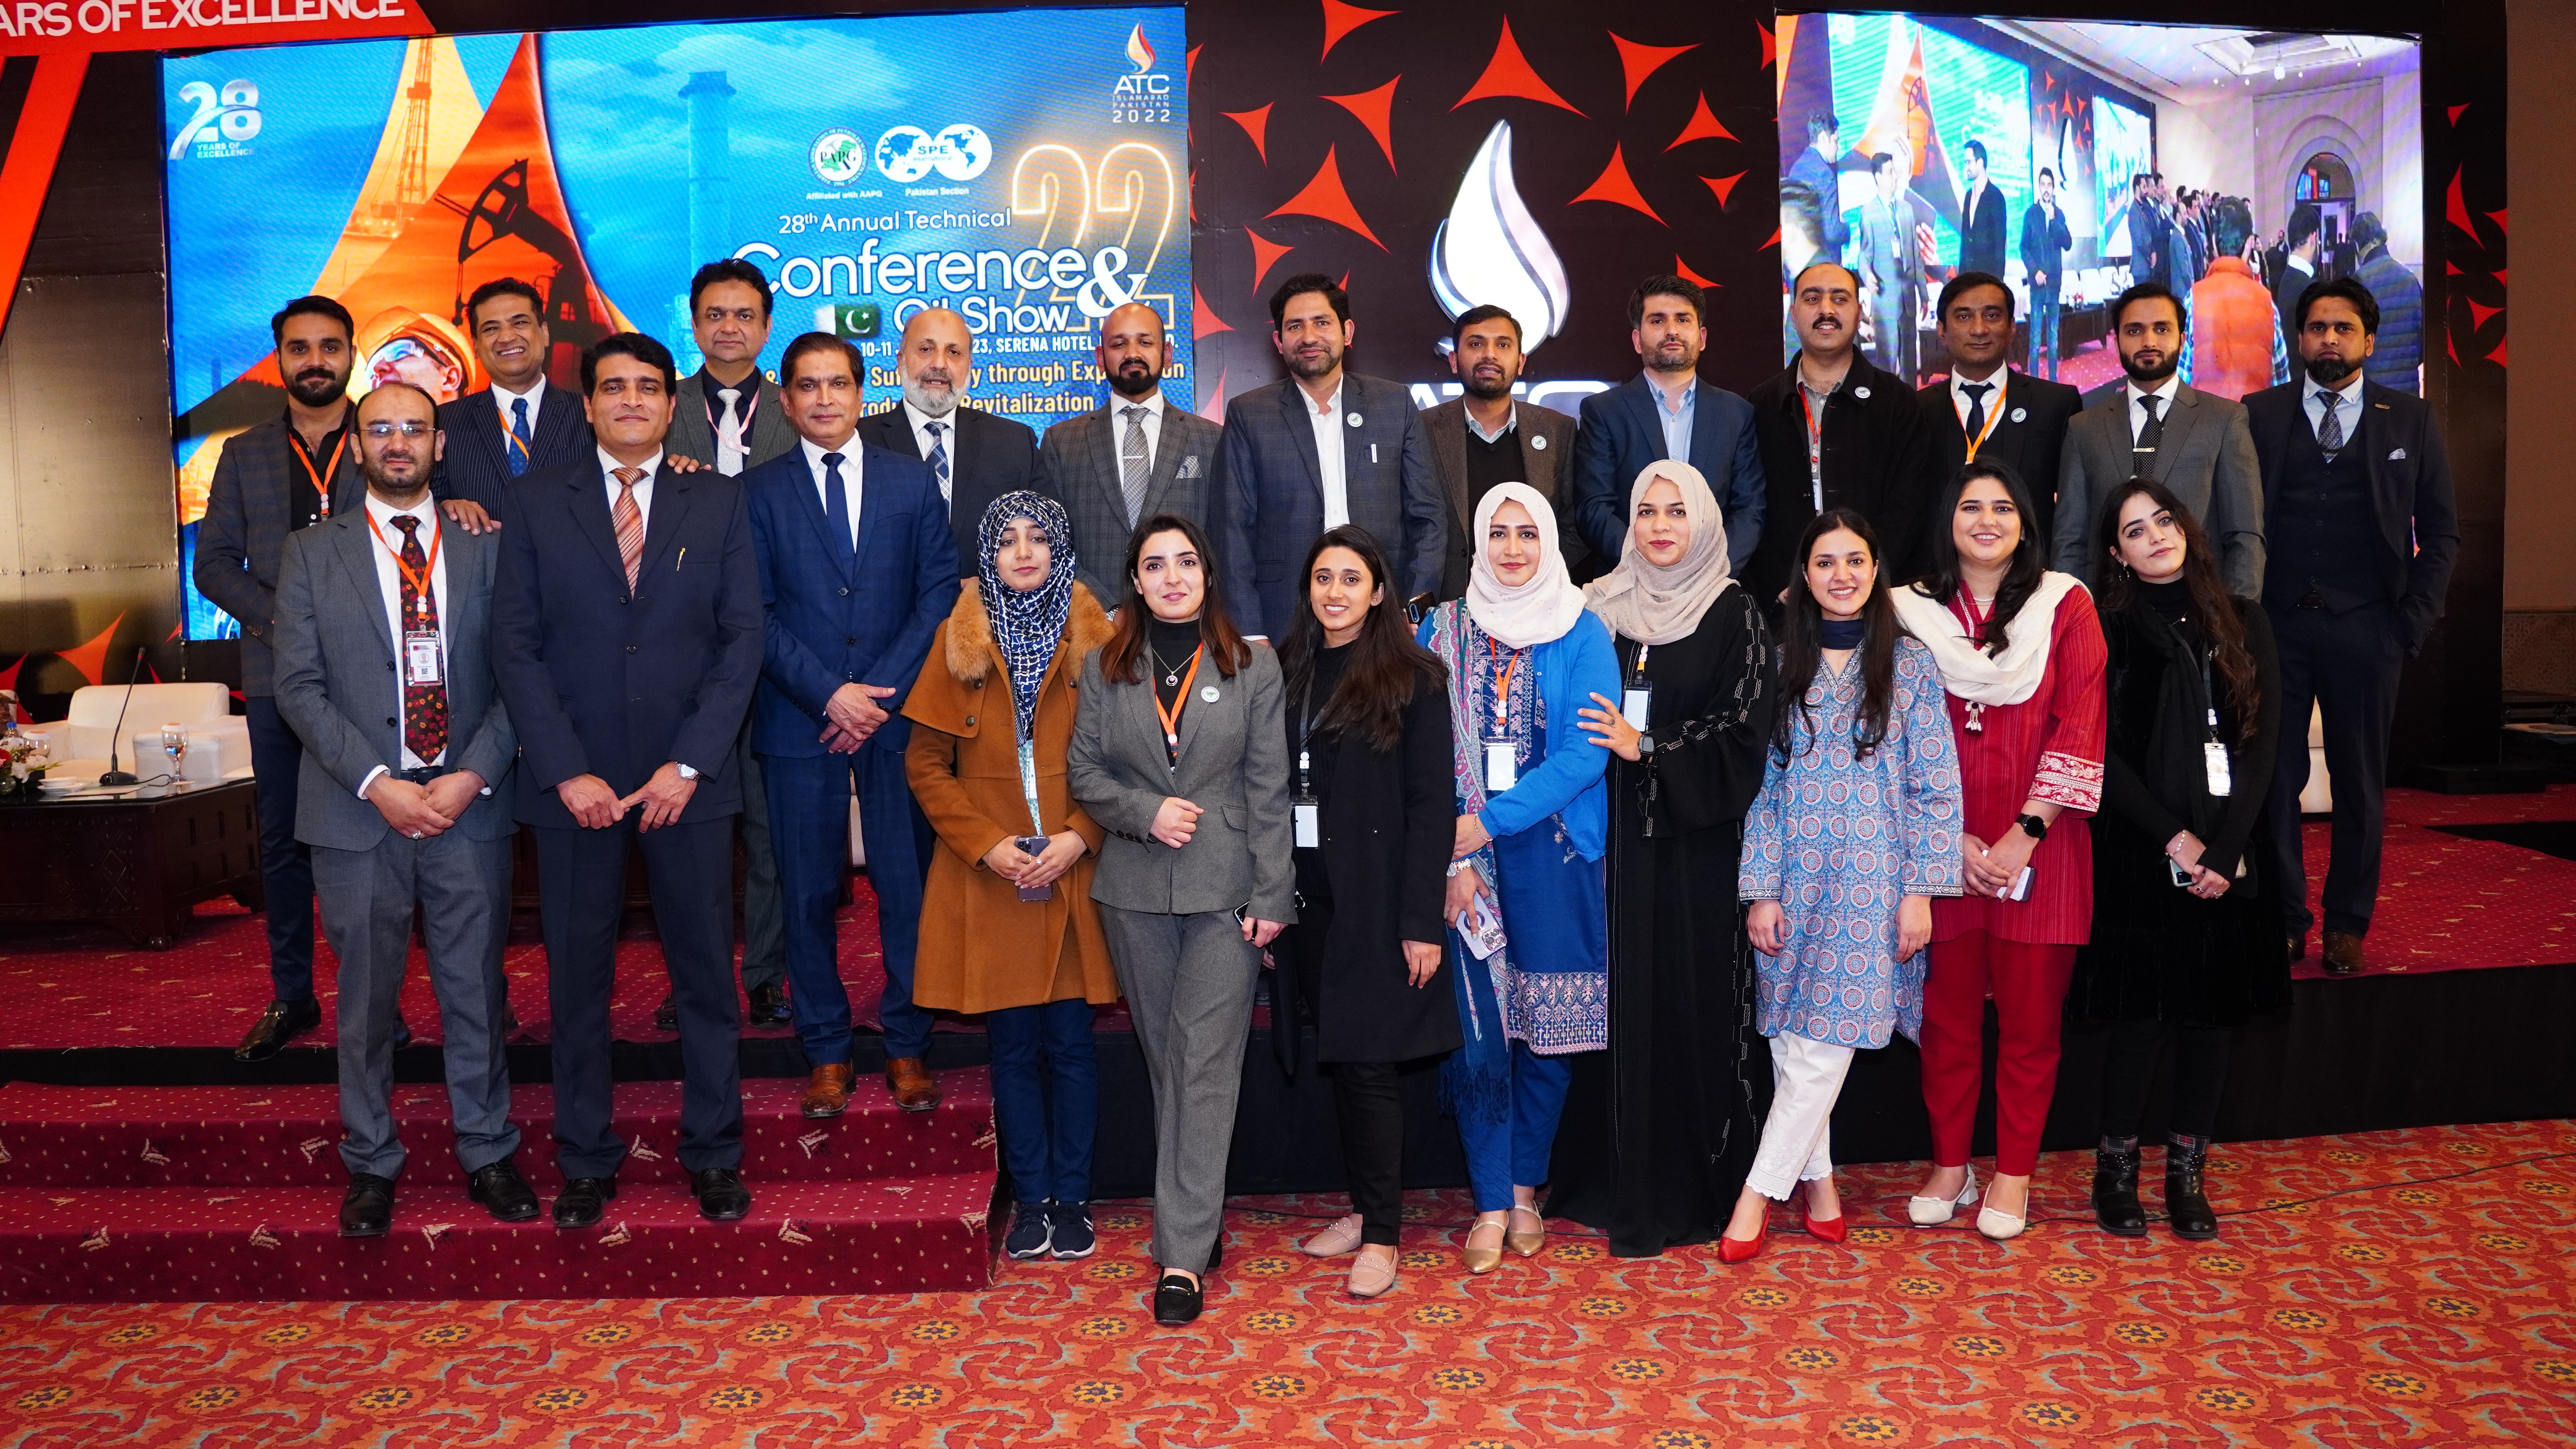 The group photo of members of oil show conference with the chief guests